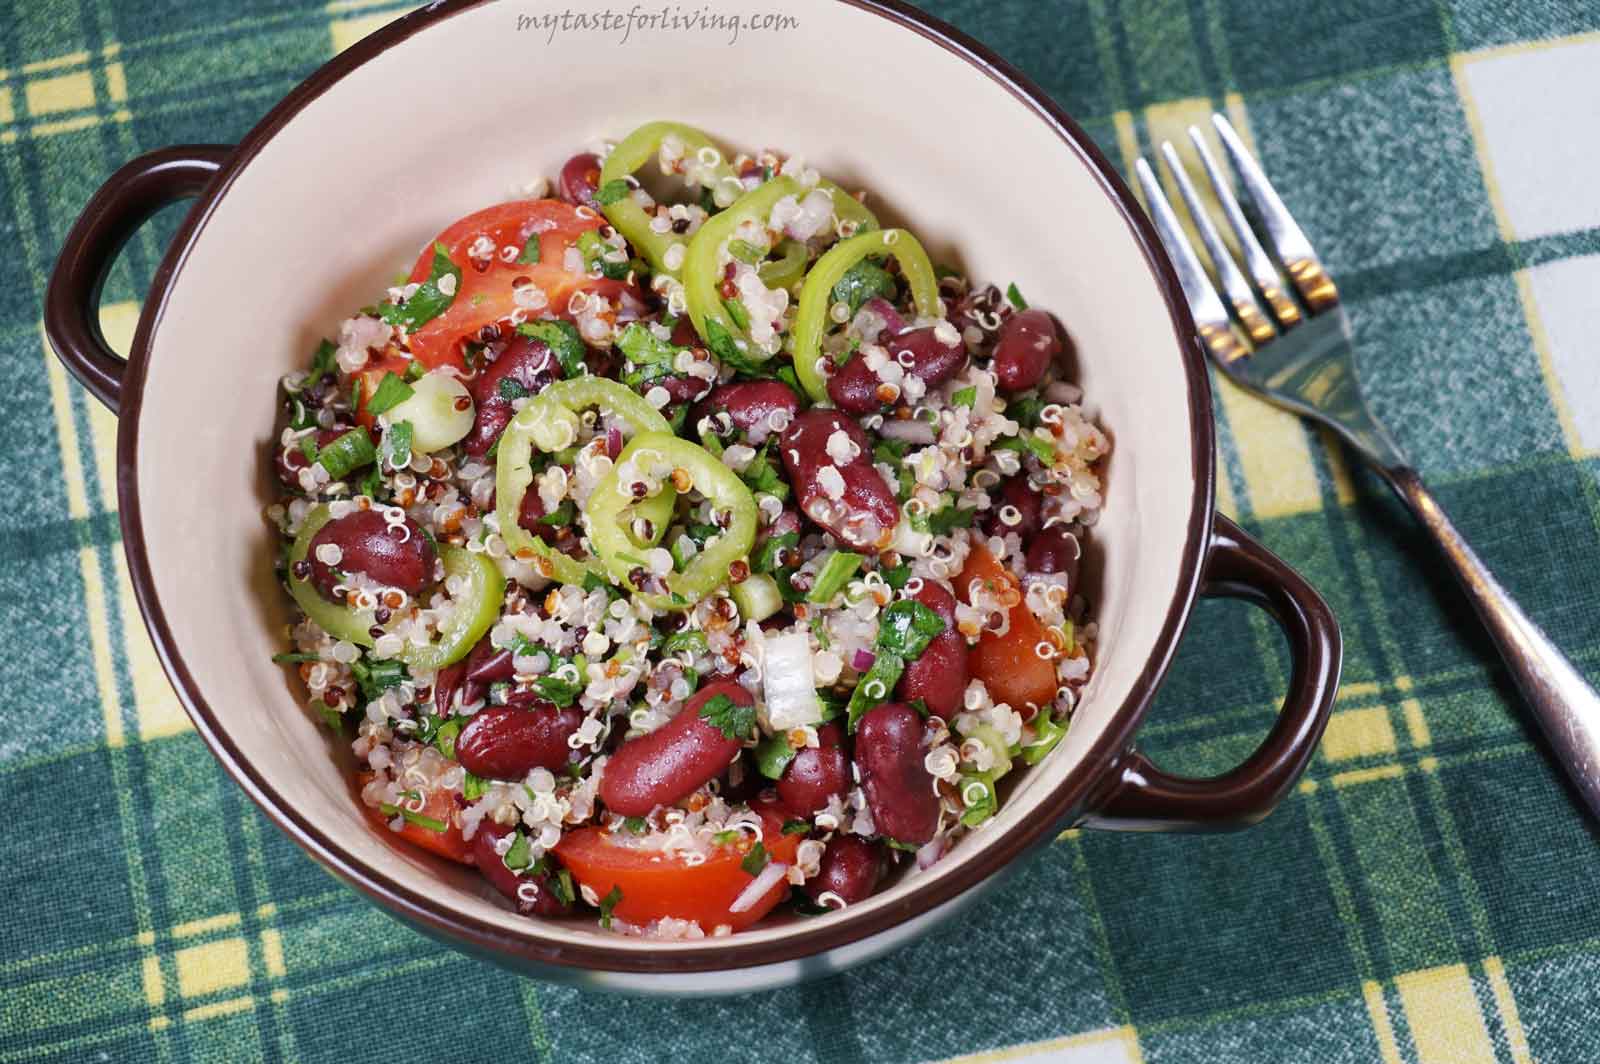 Vegan salad with quinoa, beans and vegetables (peppers, tomatoes, green onion and red onion). I used a mix of white, red and black quinoa to prepare the recipe, but you can use whatever quinoa you want.